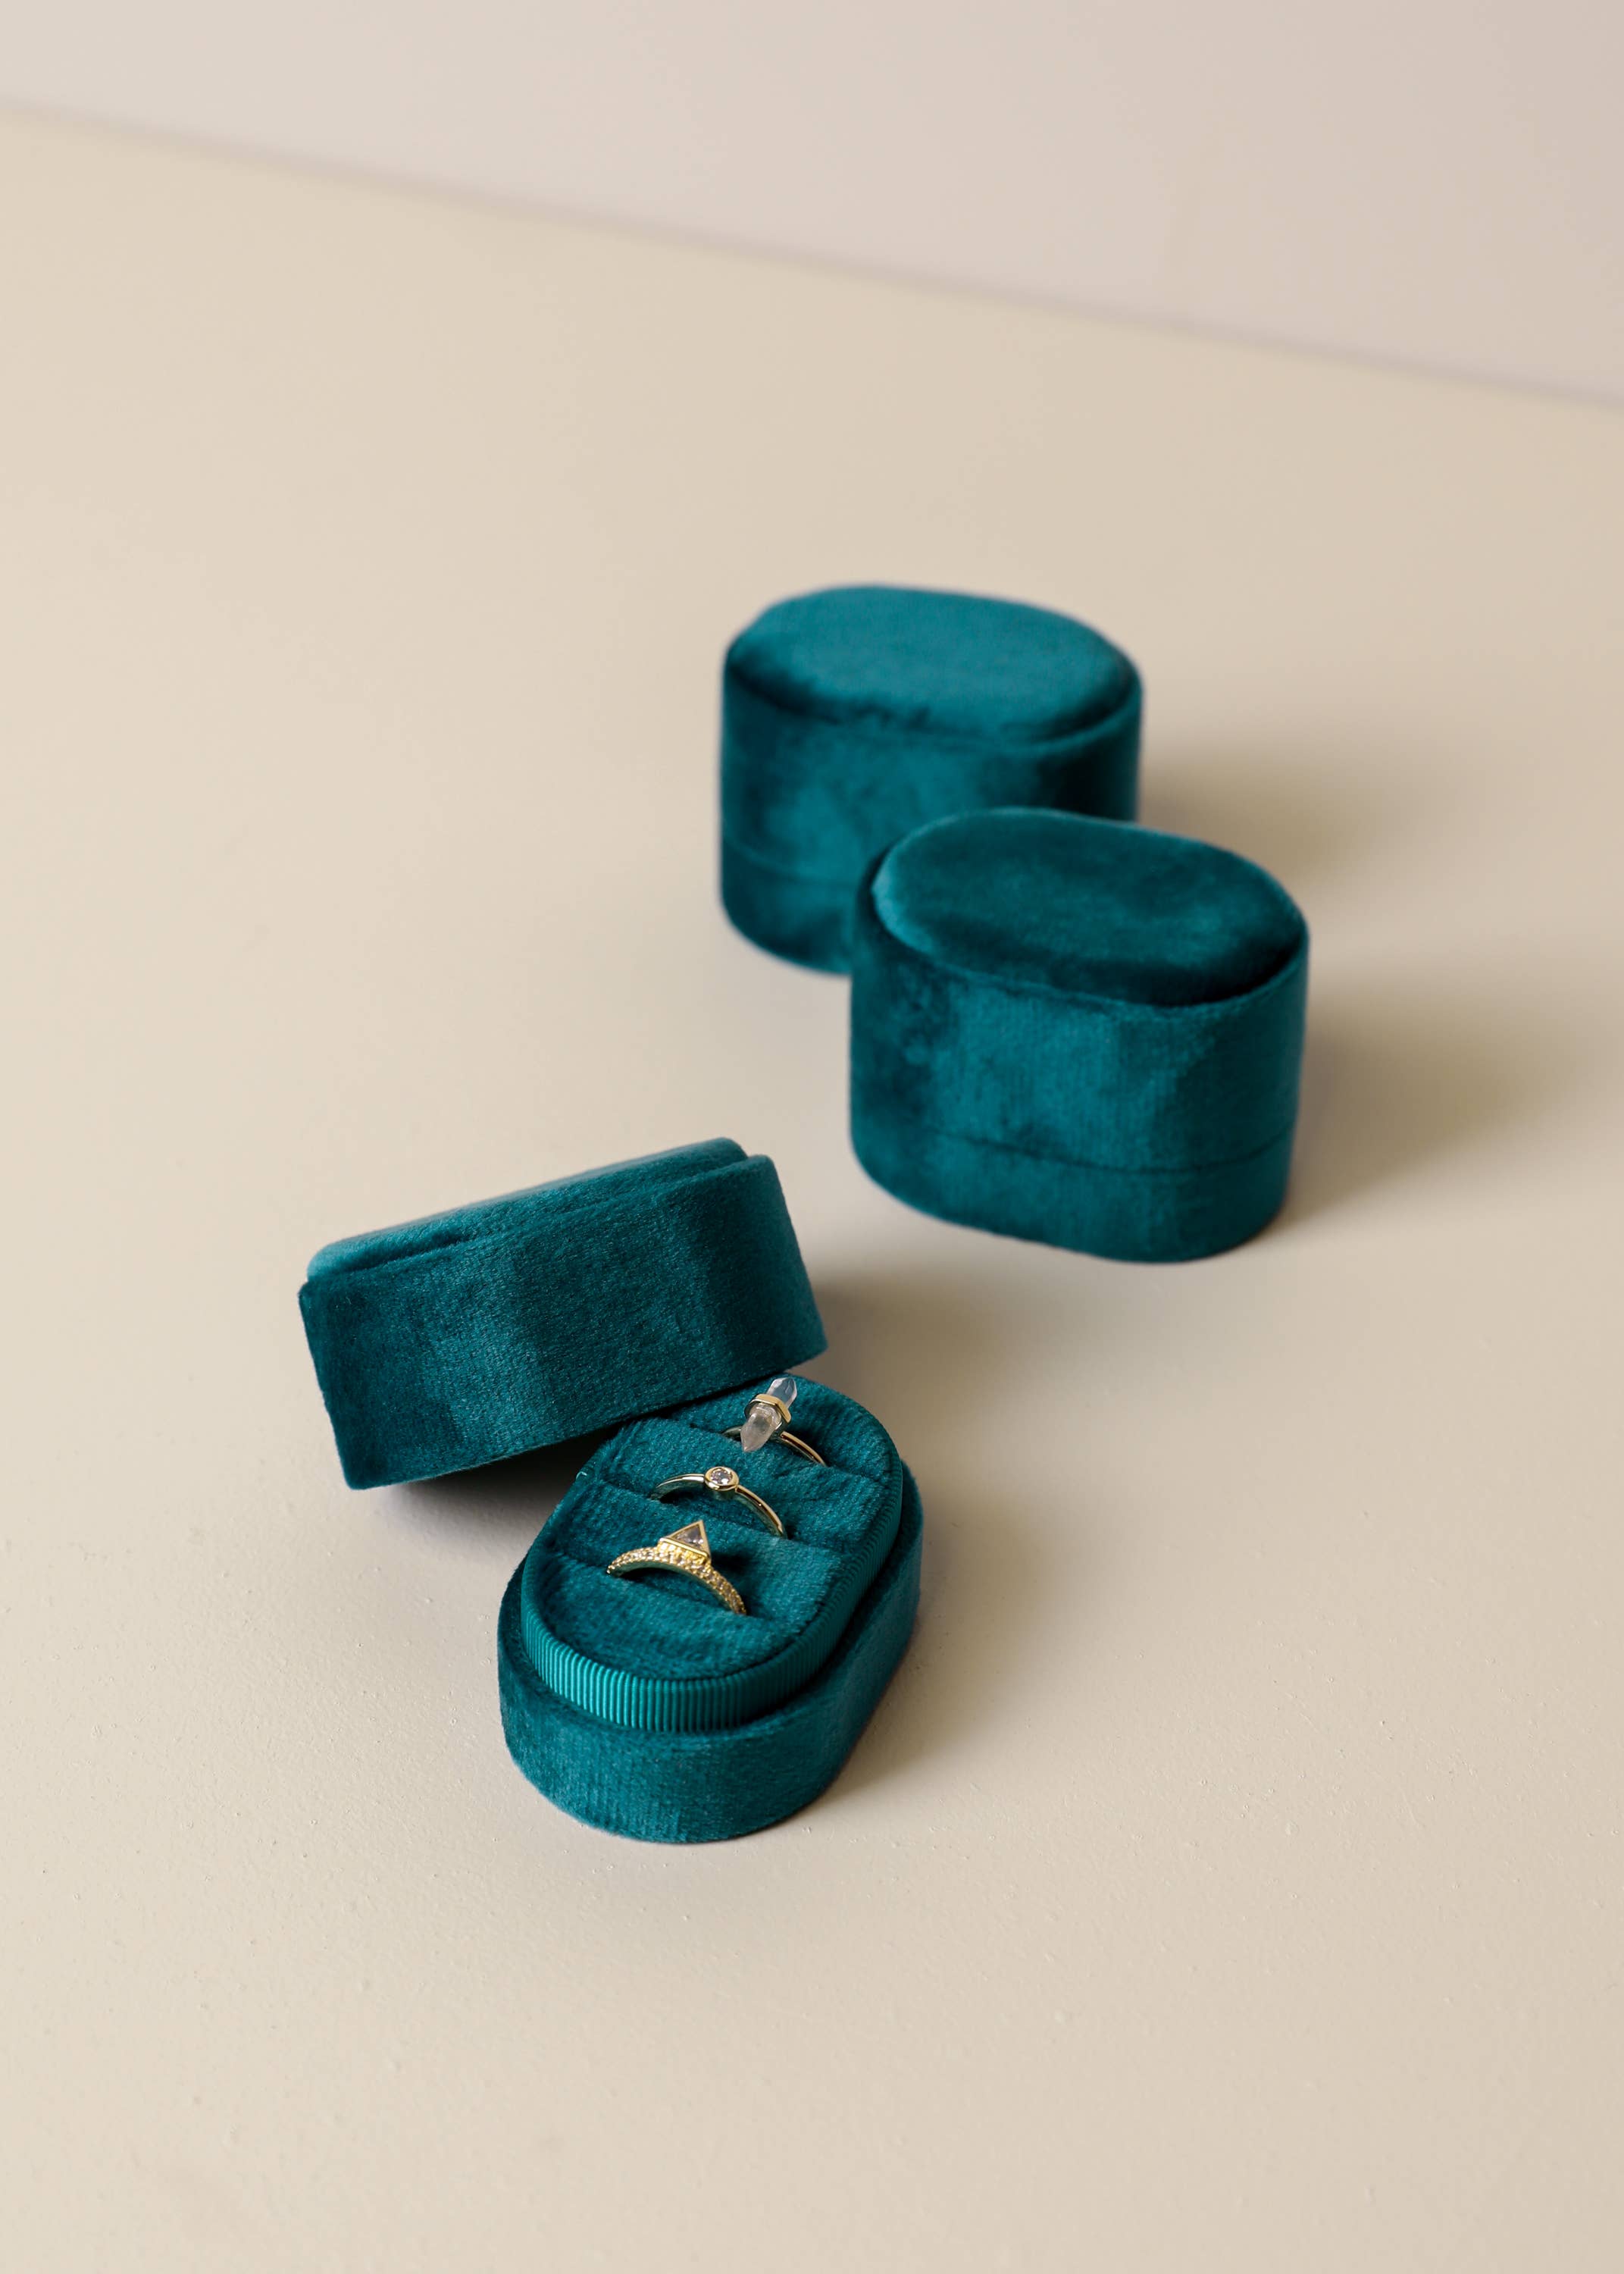 Velvet Jewelry Box - Small Oval - Teal: Teal